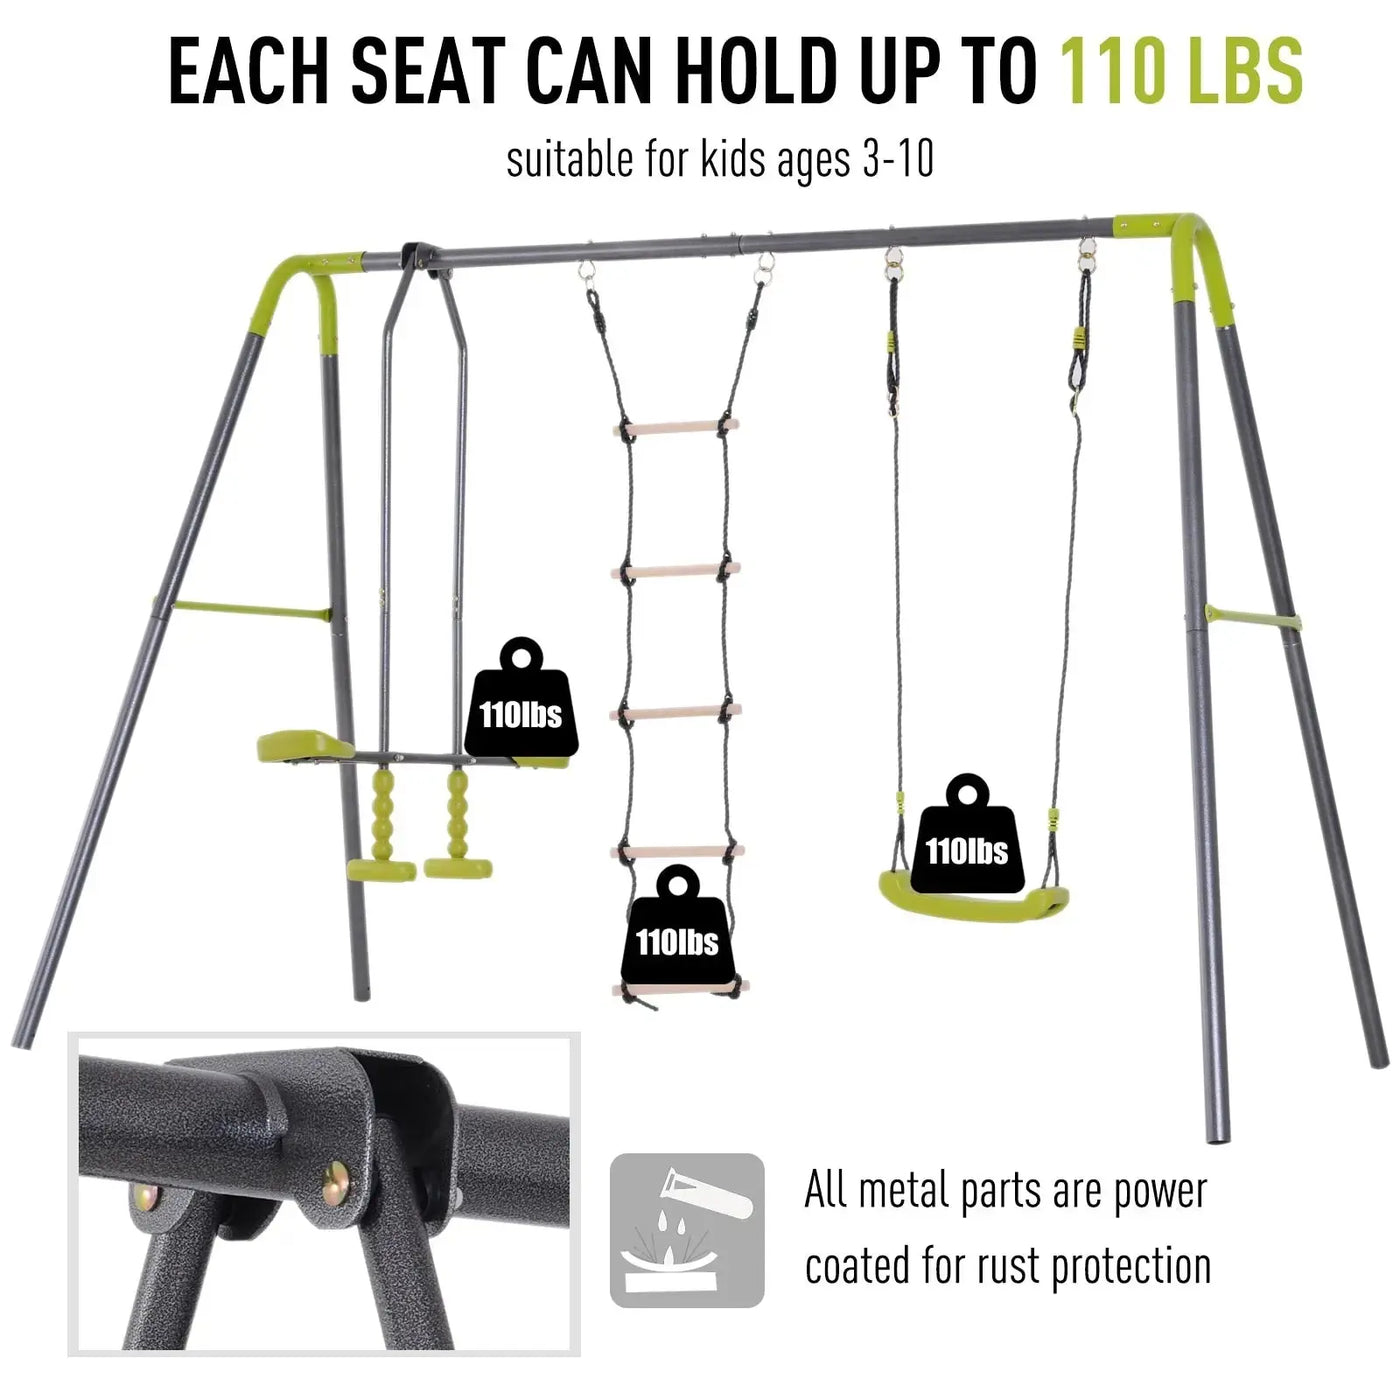 attached, backyard, beam, braces, chance, children, climbing, coating, construction, drilled, easily, easy, frame, glider, happypetsupply3, hours, kids, ladder, material, metal, outdoor, playground, powder, rope, seat, shipping, size, slide, swing, with